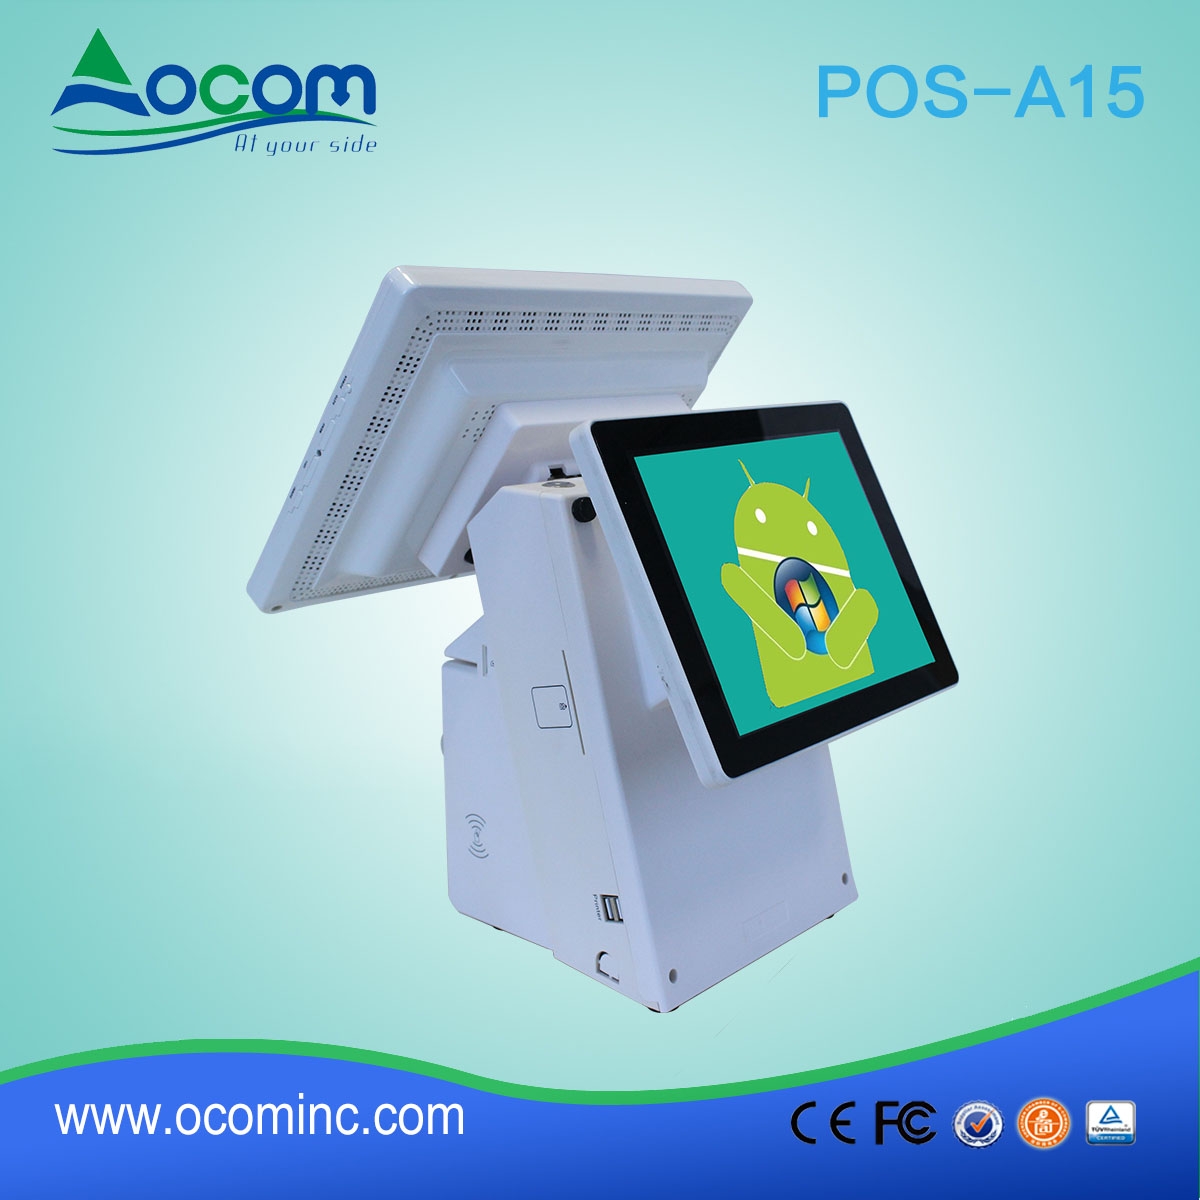 (POS-A15) New model with thermal printer built-in Touch Screen POS Machine